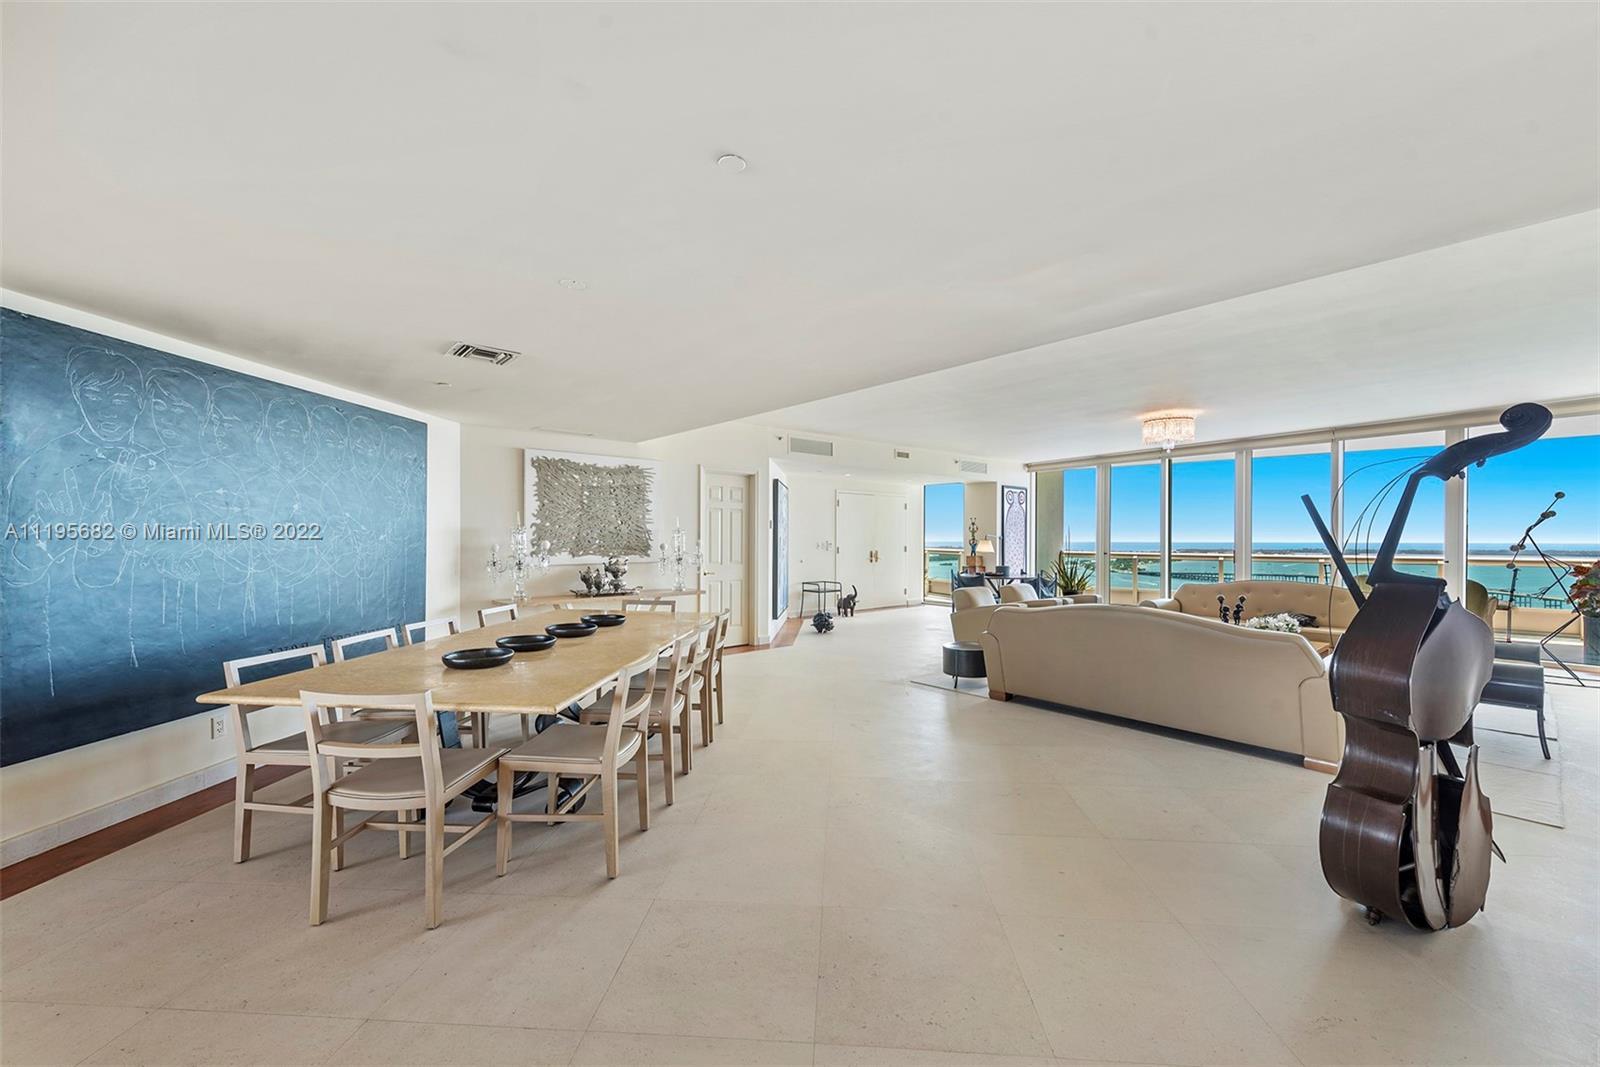 Sensational flow-through residence on the 33rd floor at the Santa Maria offers direct ocean, bay and